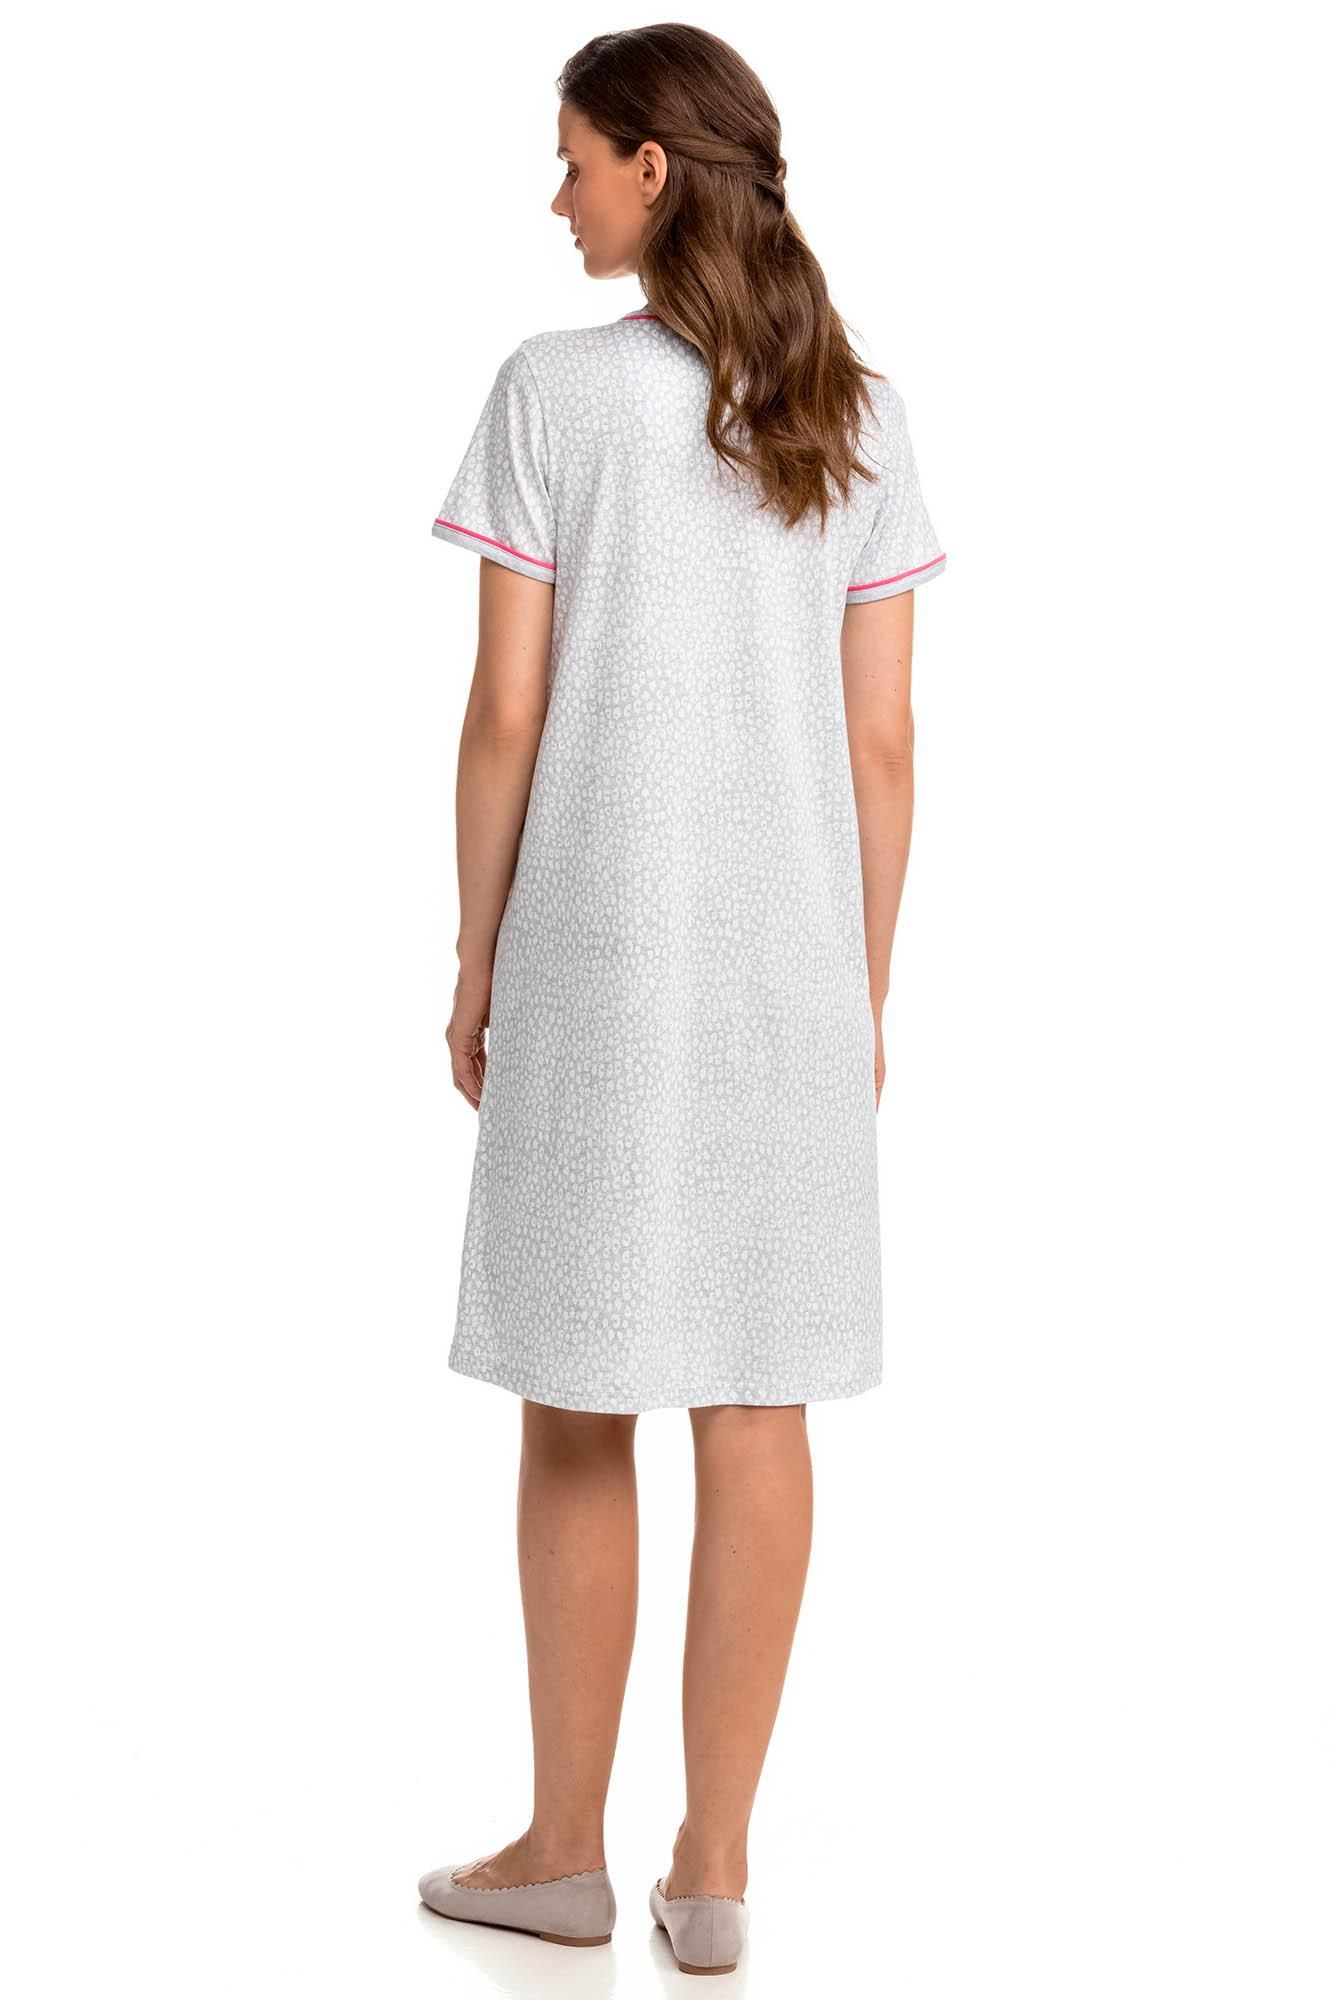 Short-Sleeved Nightgown